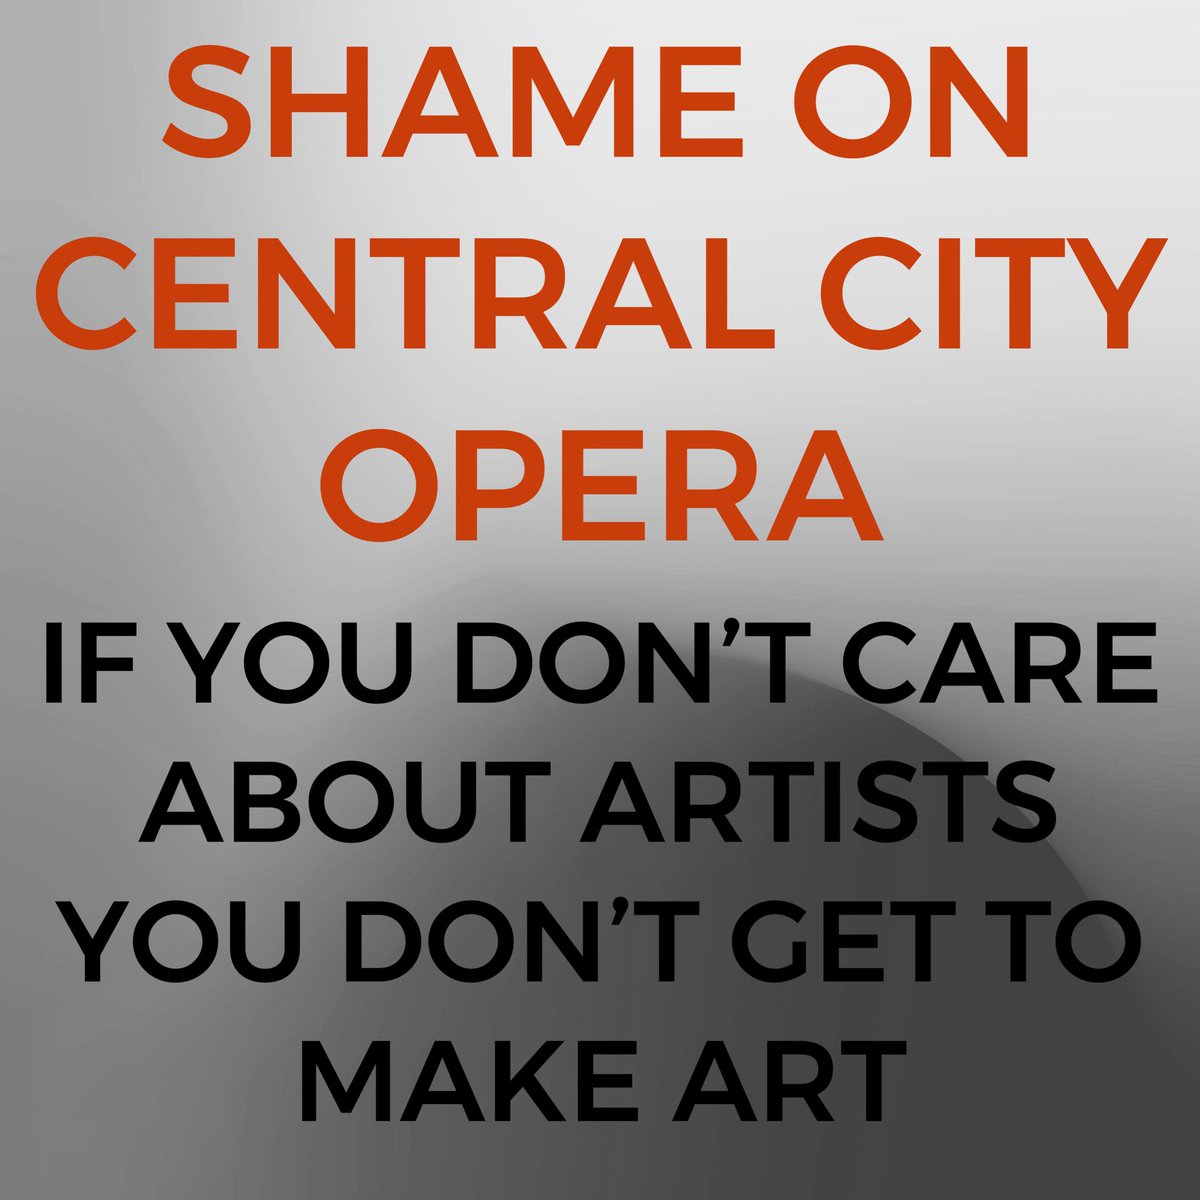 Hey friends – please unfollow @ccityopera and join the #DigitalBoycottCentralCityOpera

Their union busting tactics are endangering all of our union-negotiated contracts.